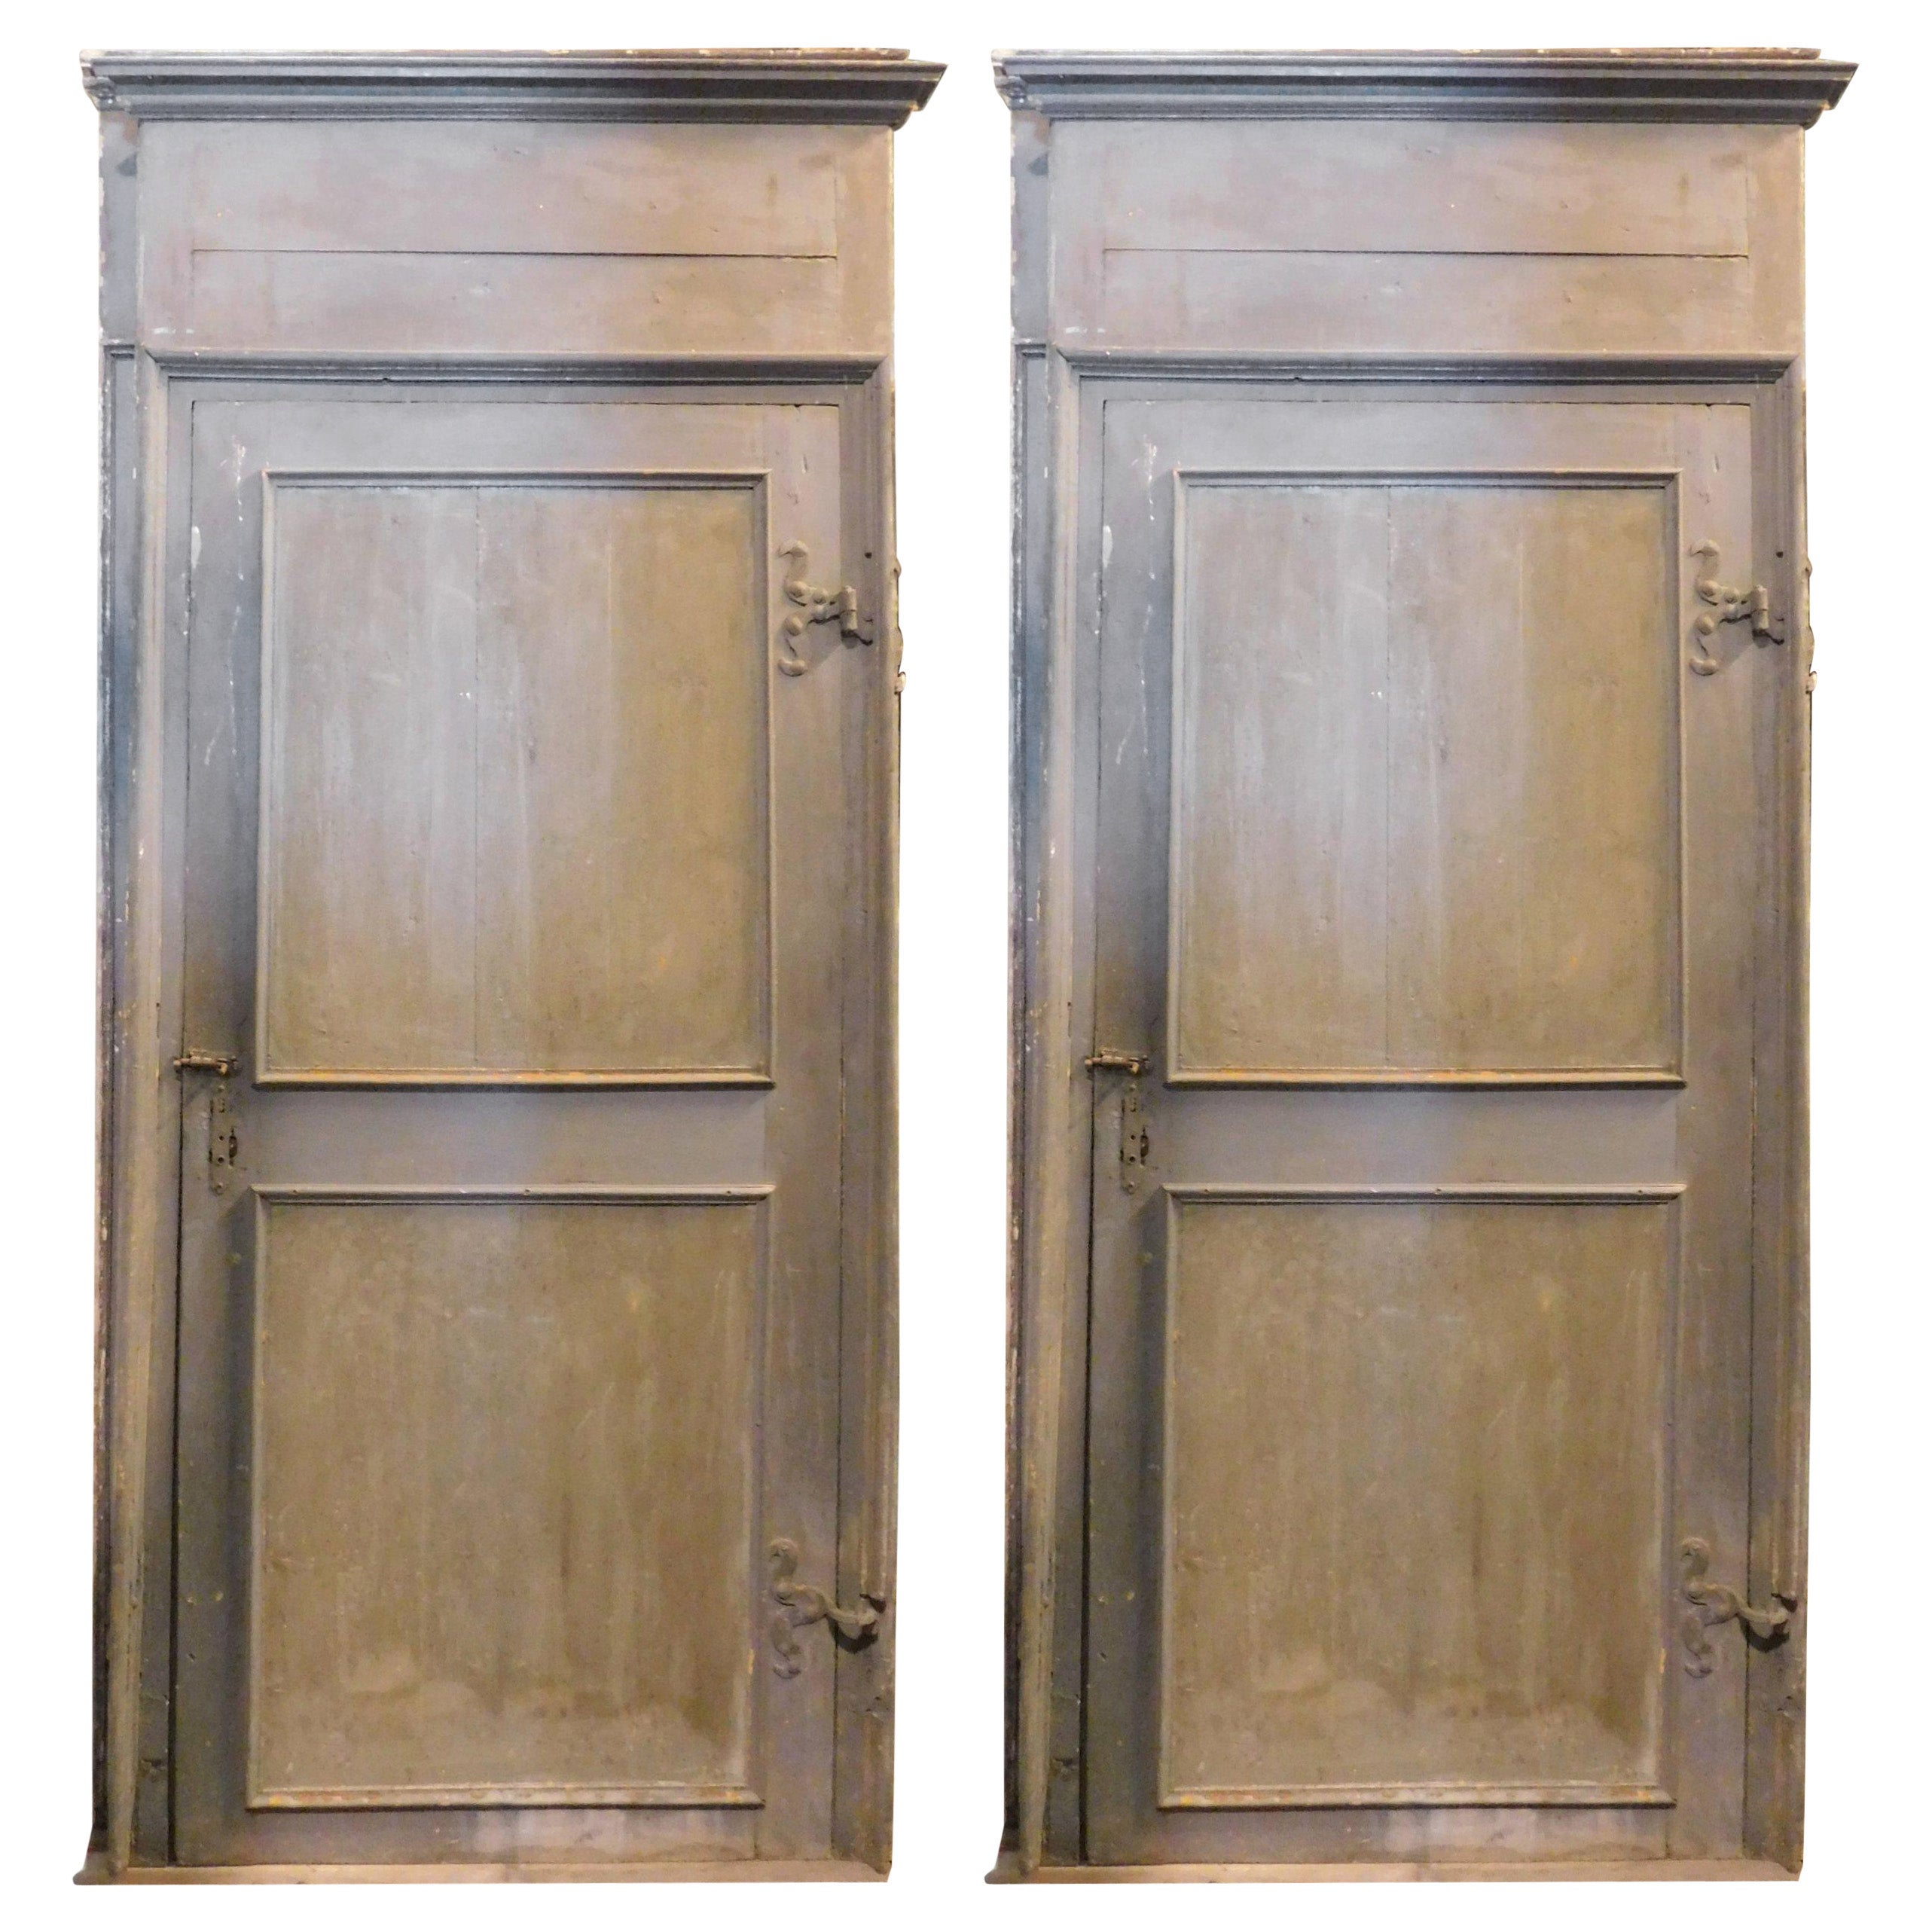 Pair of Antique Lacquered Doors Complete with Frame, 18th Century, Italy